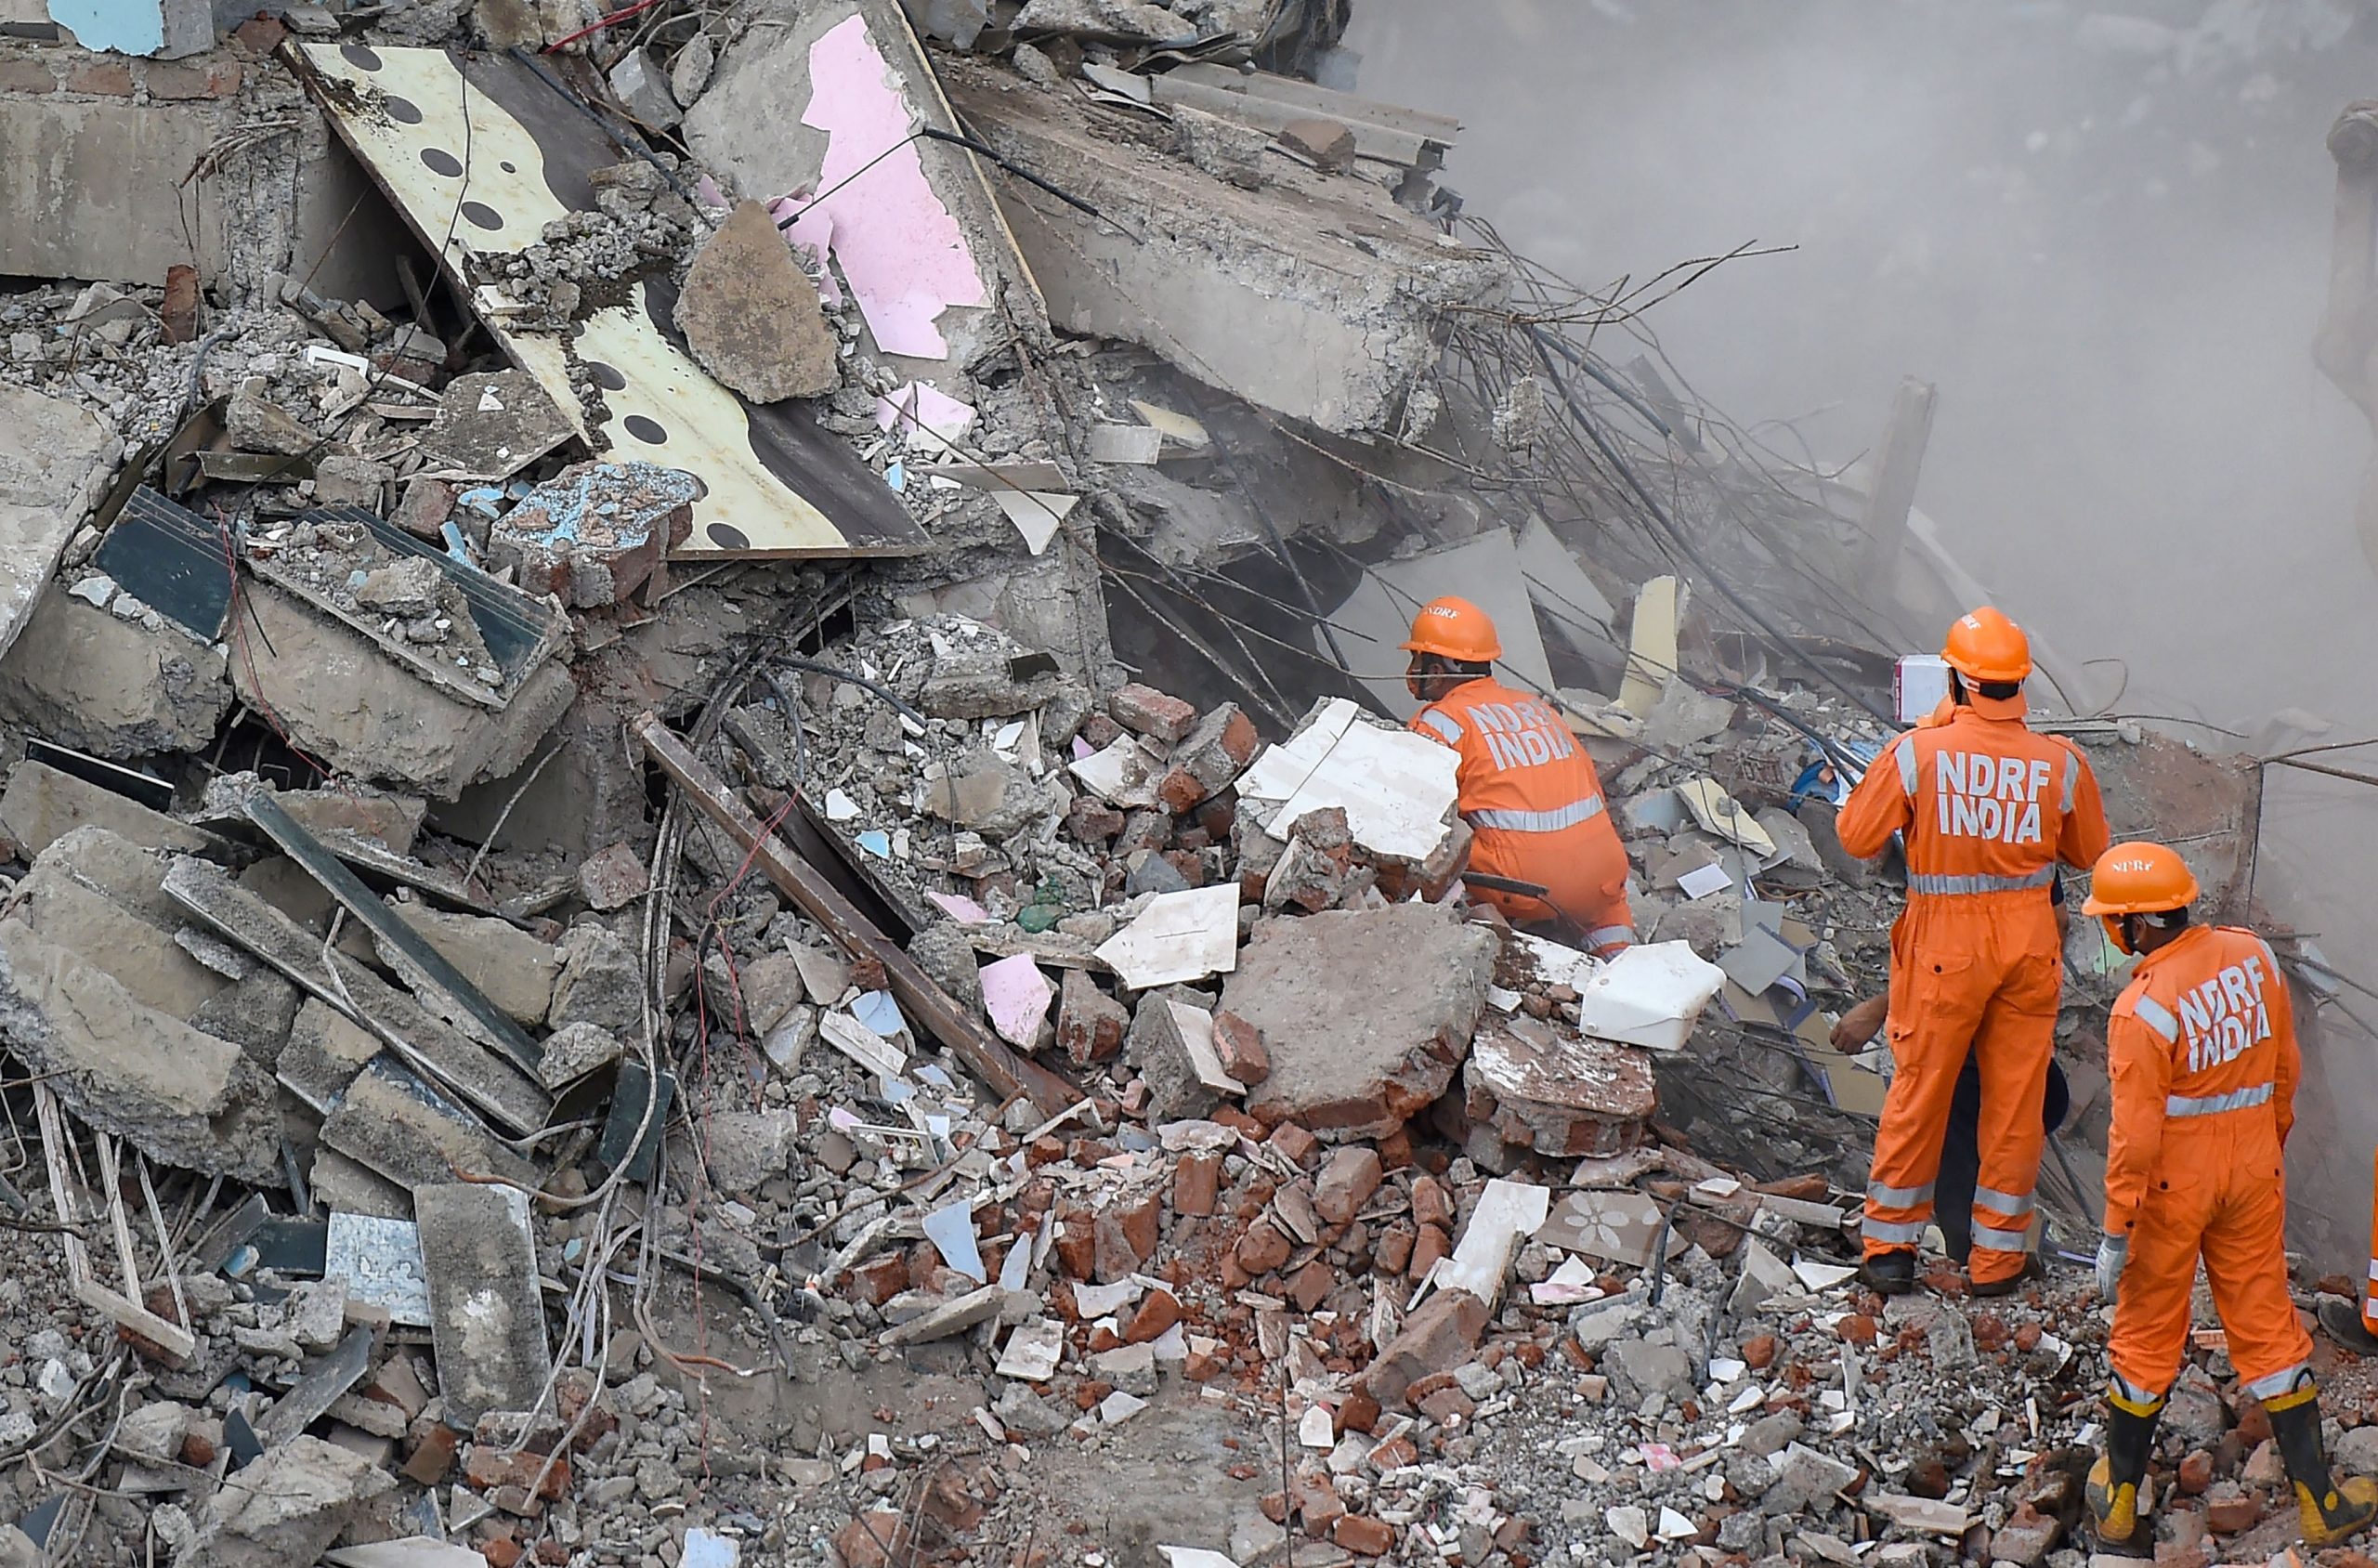 WATCH: 4-year-old rescued from under the debris of the collapsed building in Raigad